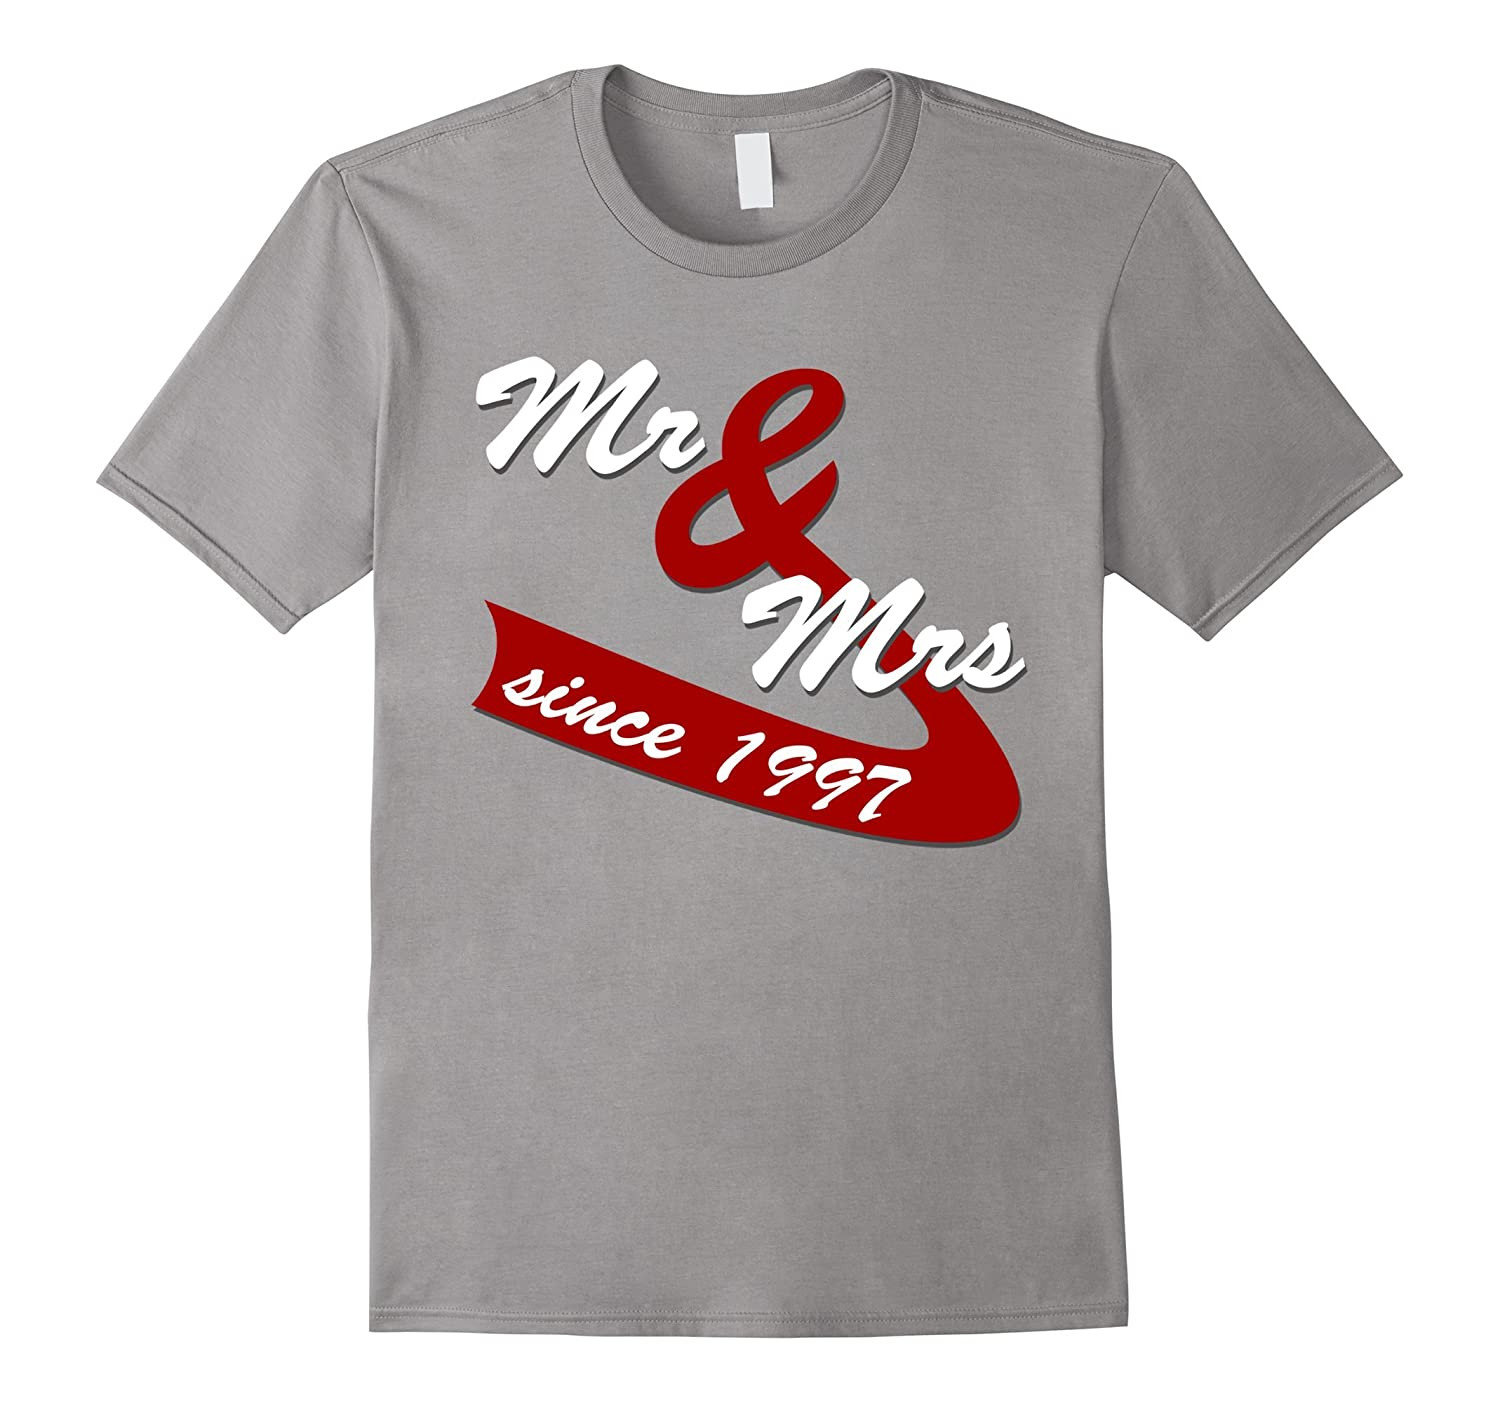 20Th Anniversary Gift Ideas For A Couple
 20th Wedding Anniversary Gift Ideas Couples T shirt PL